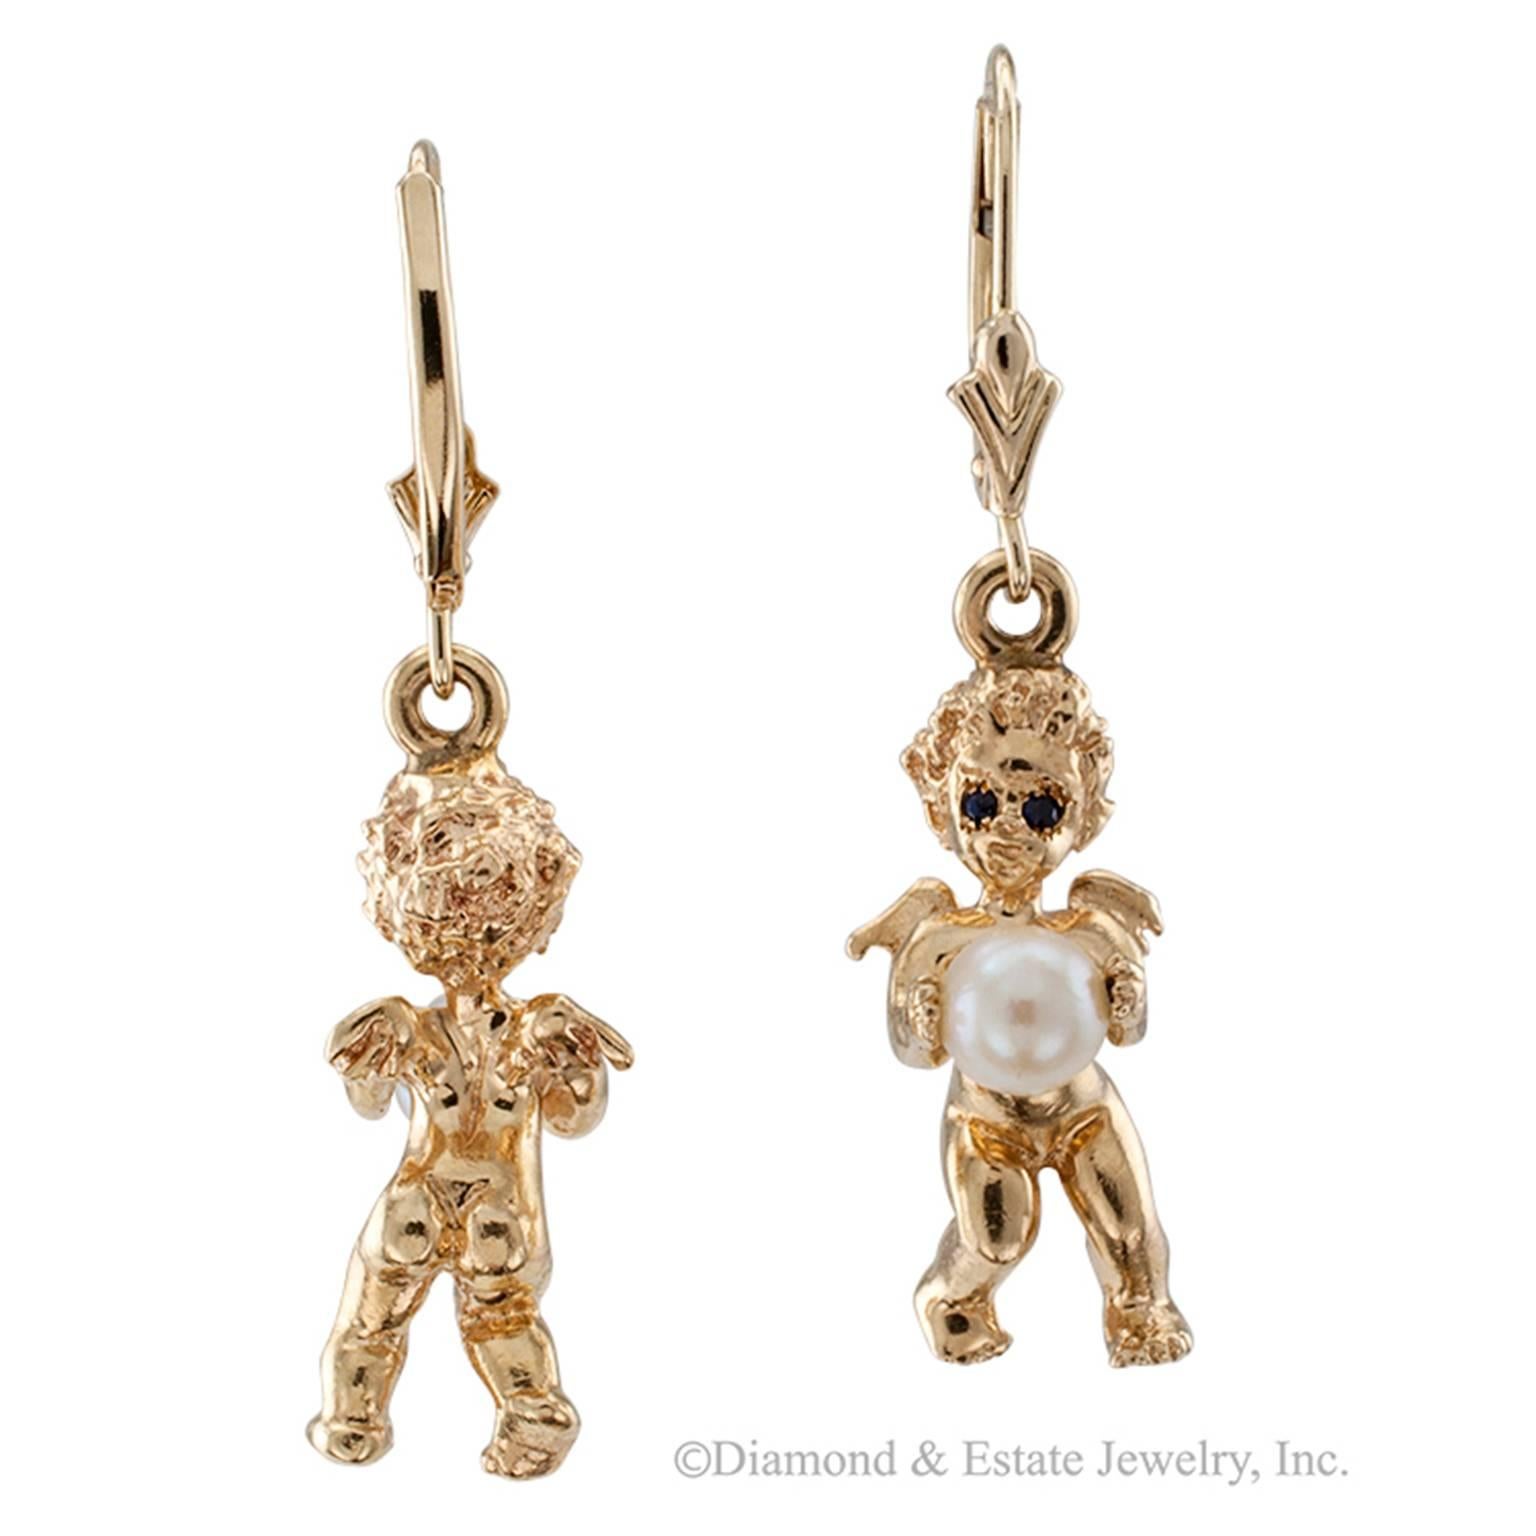 Women's or Men's Gold and Cultured Pearl Cherub Earrings Attributed to Ruser